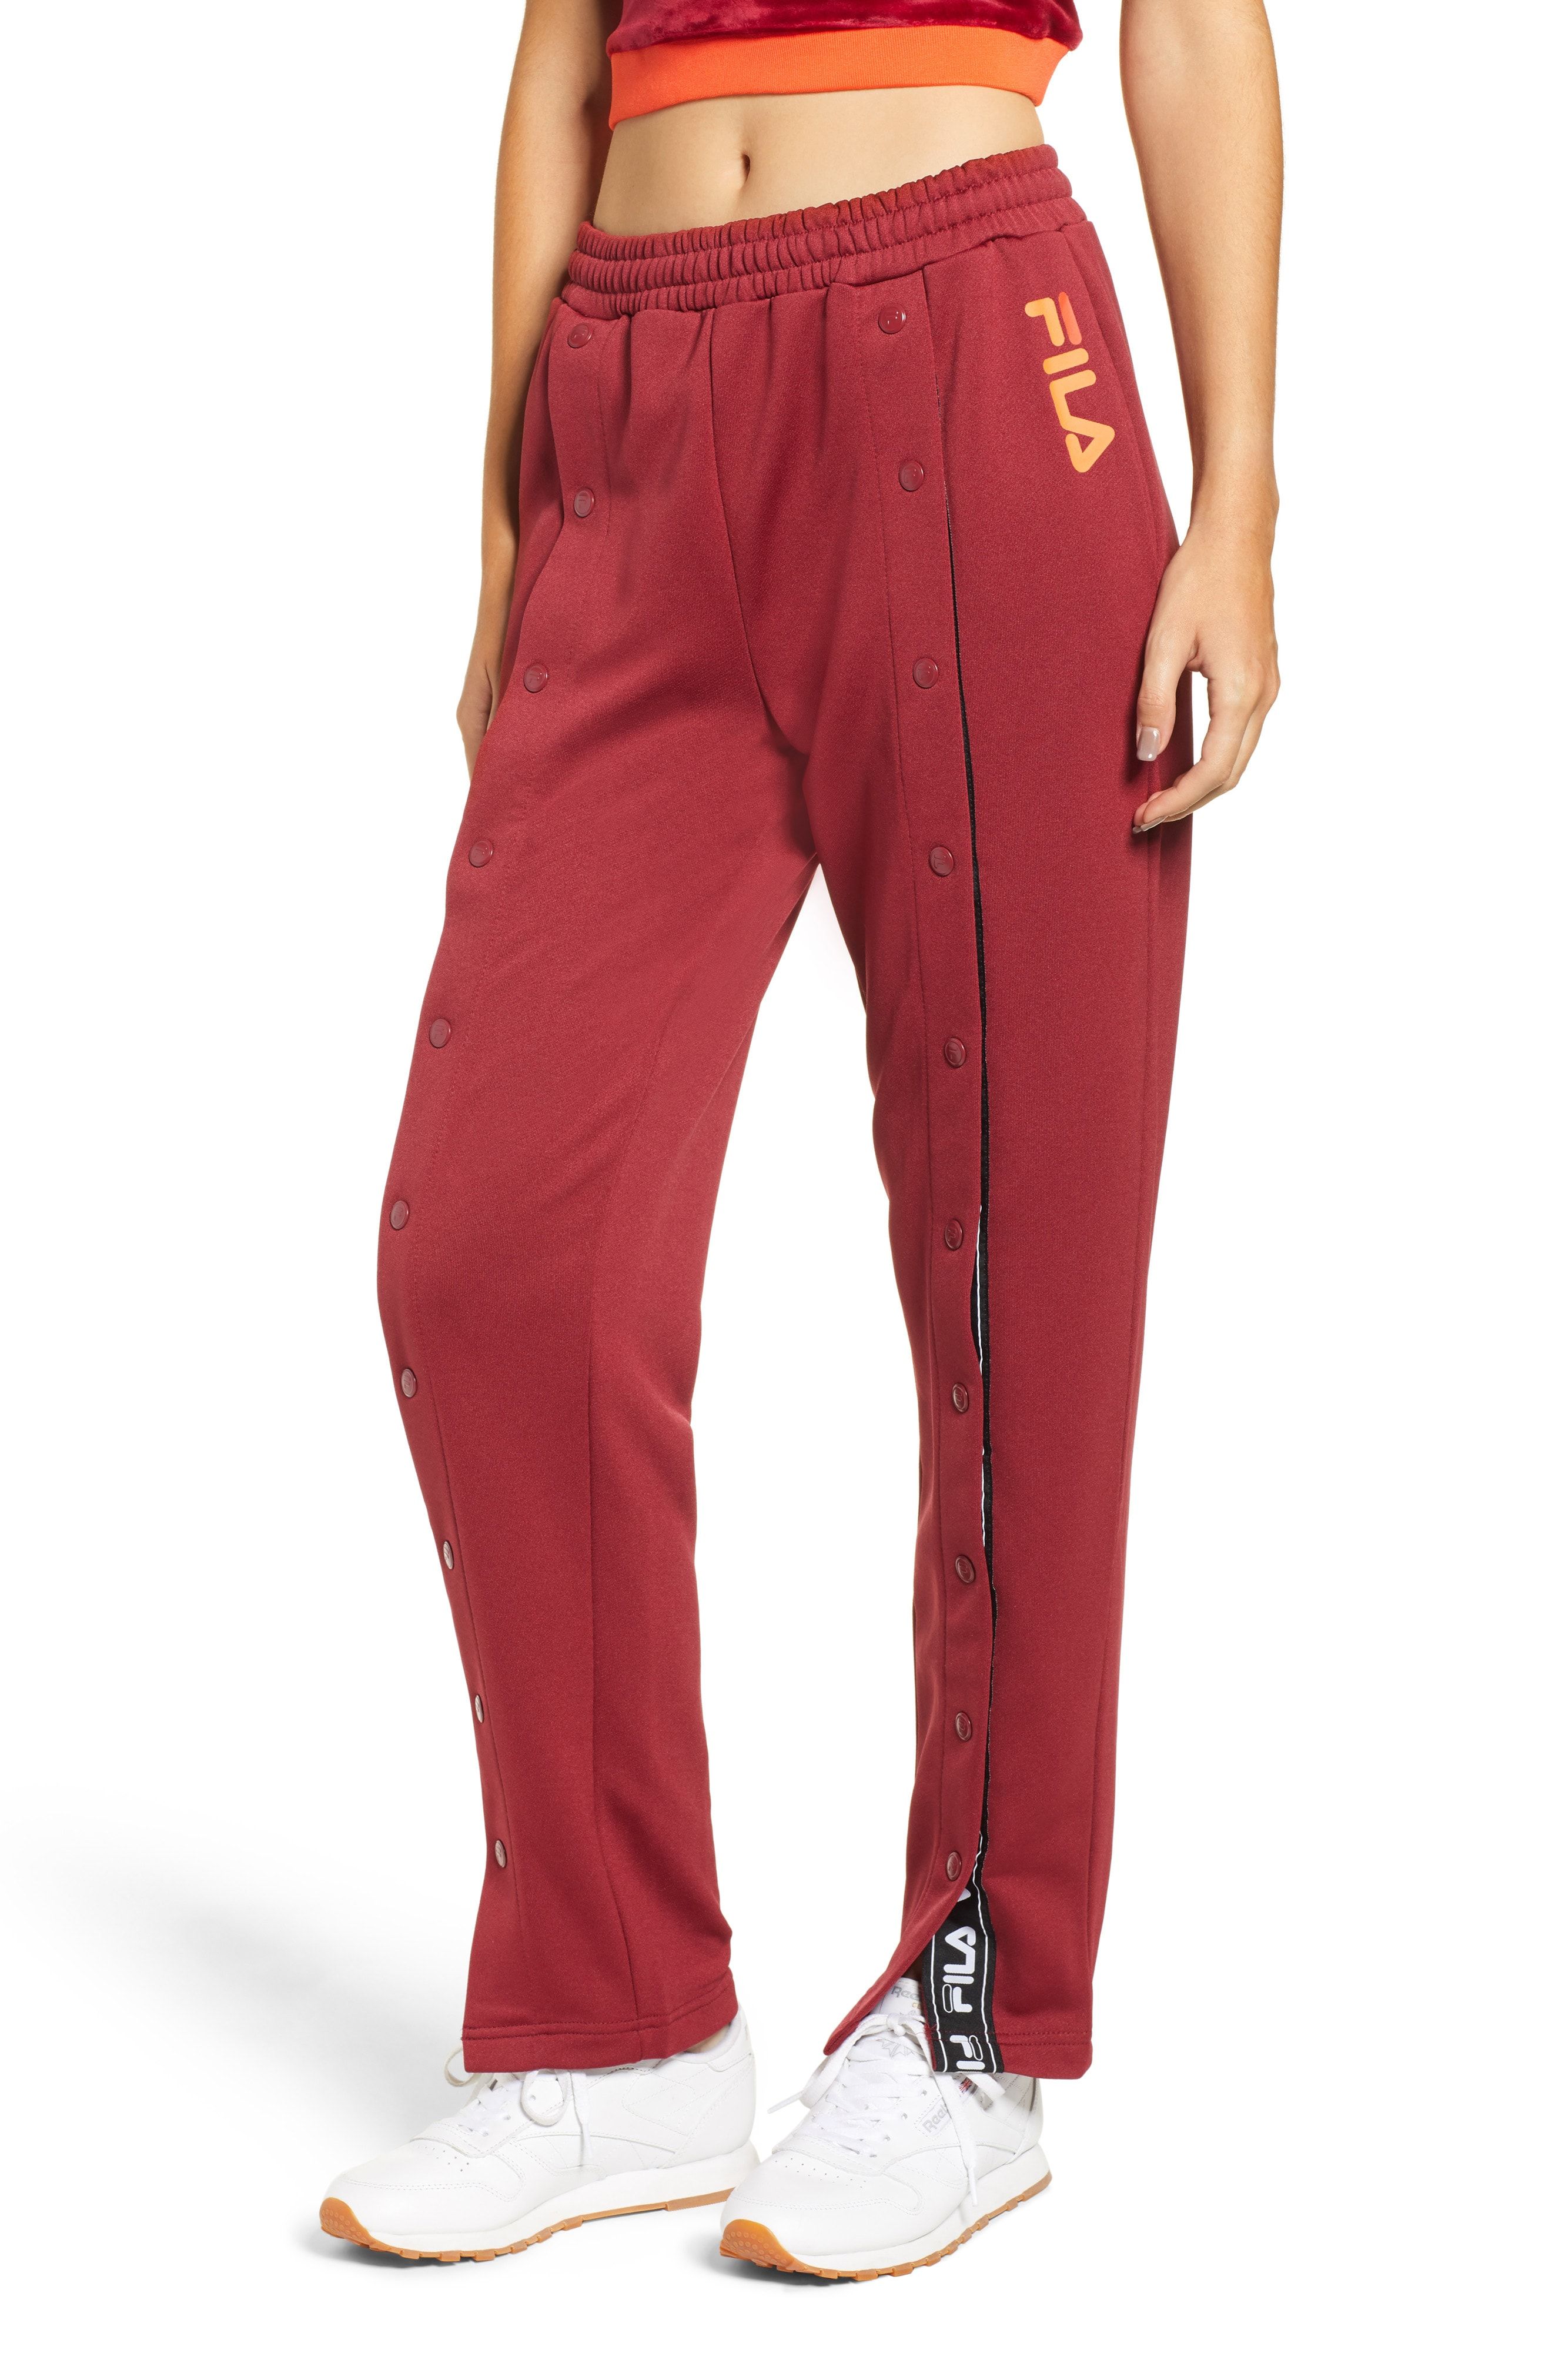 Tearaway Pants Alice Snap Front Track Pants